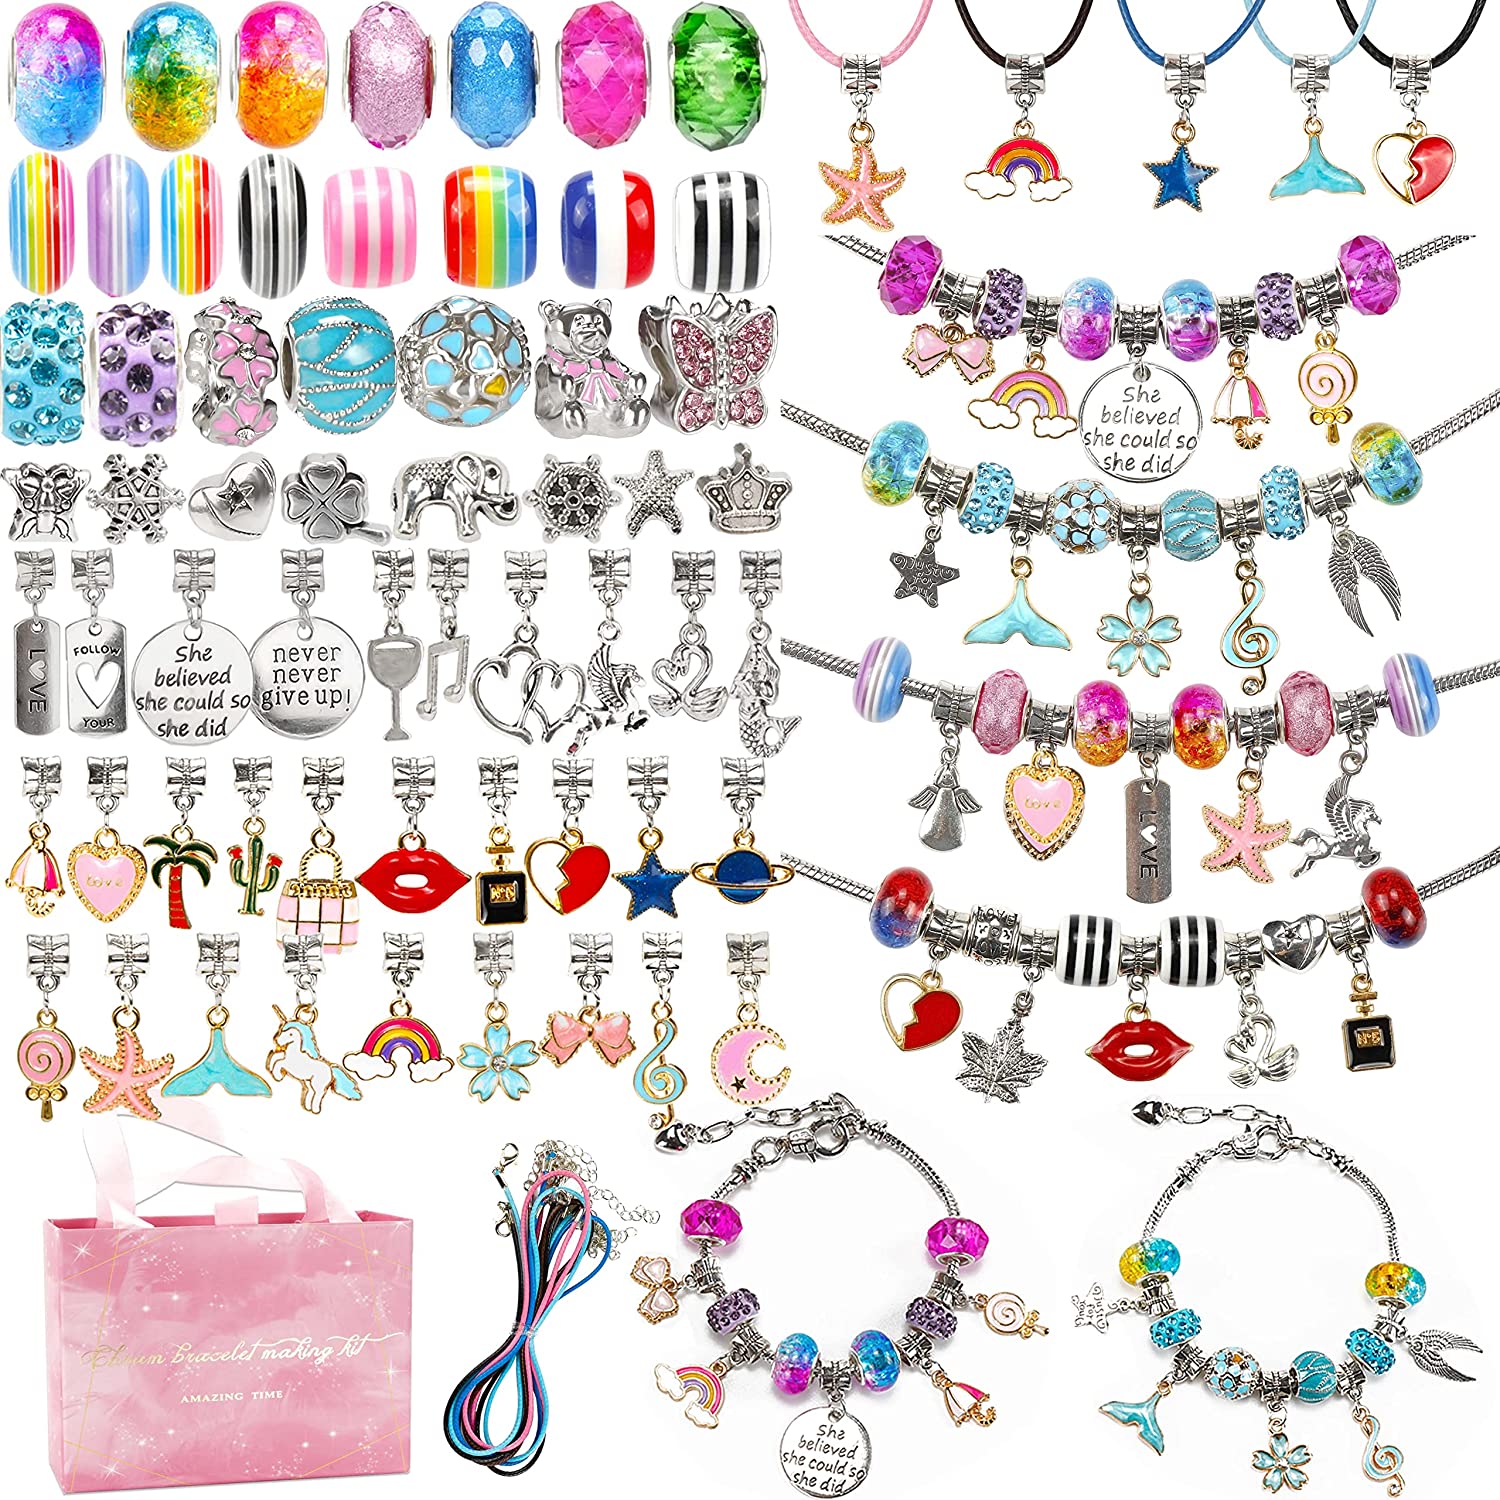 130 Pieces Charm Bracelet Making Kit Including Jewelry Beads Snake Chains,  DIY Craft for Girls, Jewelry Christmas Gift Set for Arts and Crafts for Kids  Ages 8-12 